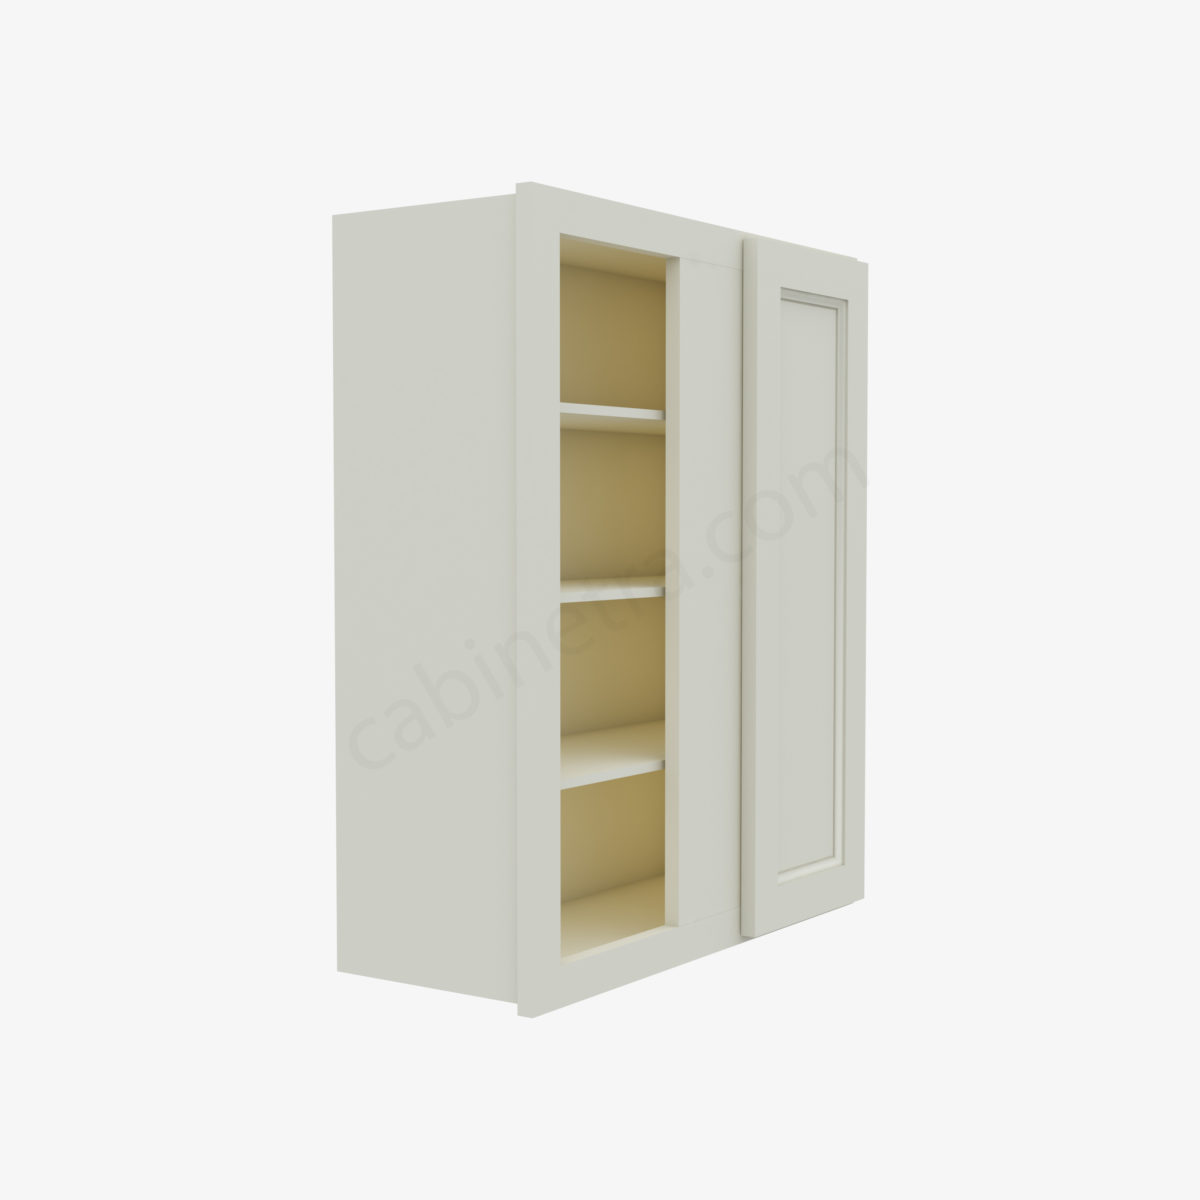 TQ WBLC30 33 3036 4 Forevermark Townplace Crema Cabinetra scaled